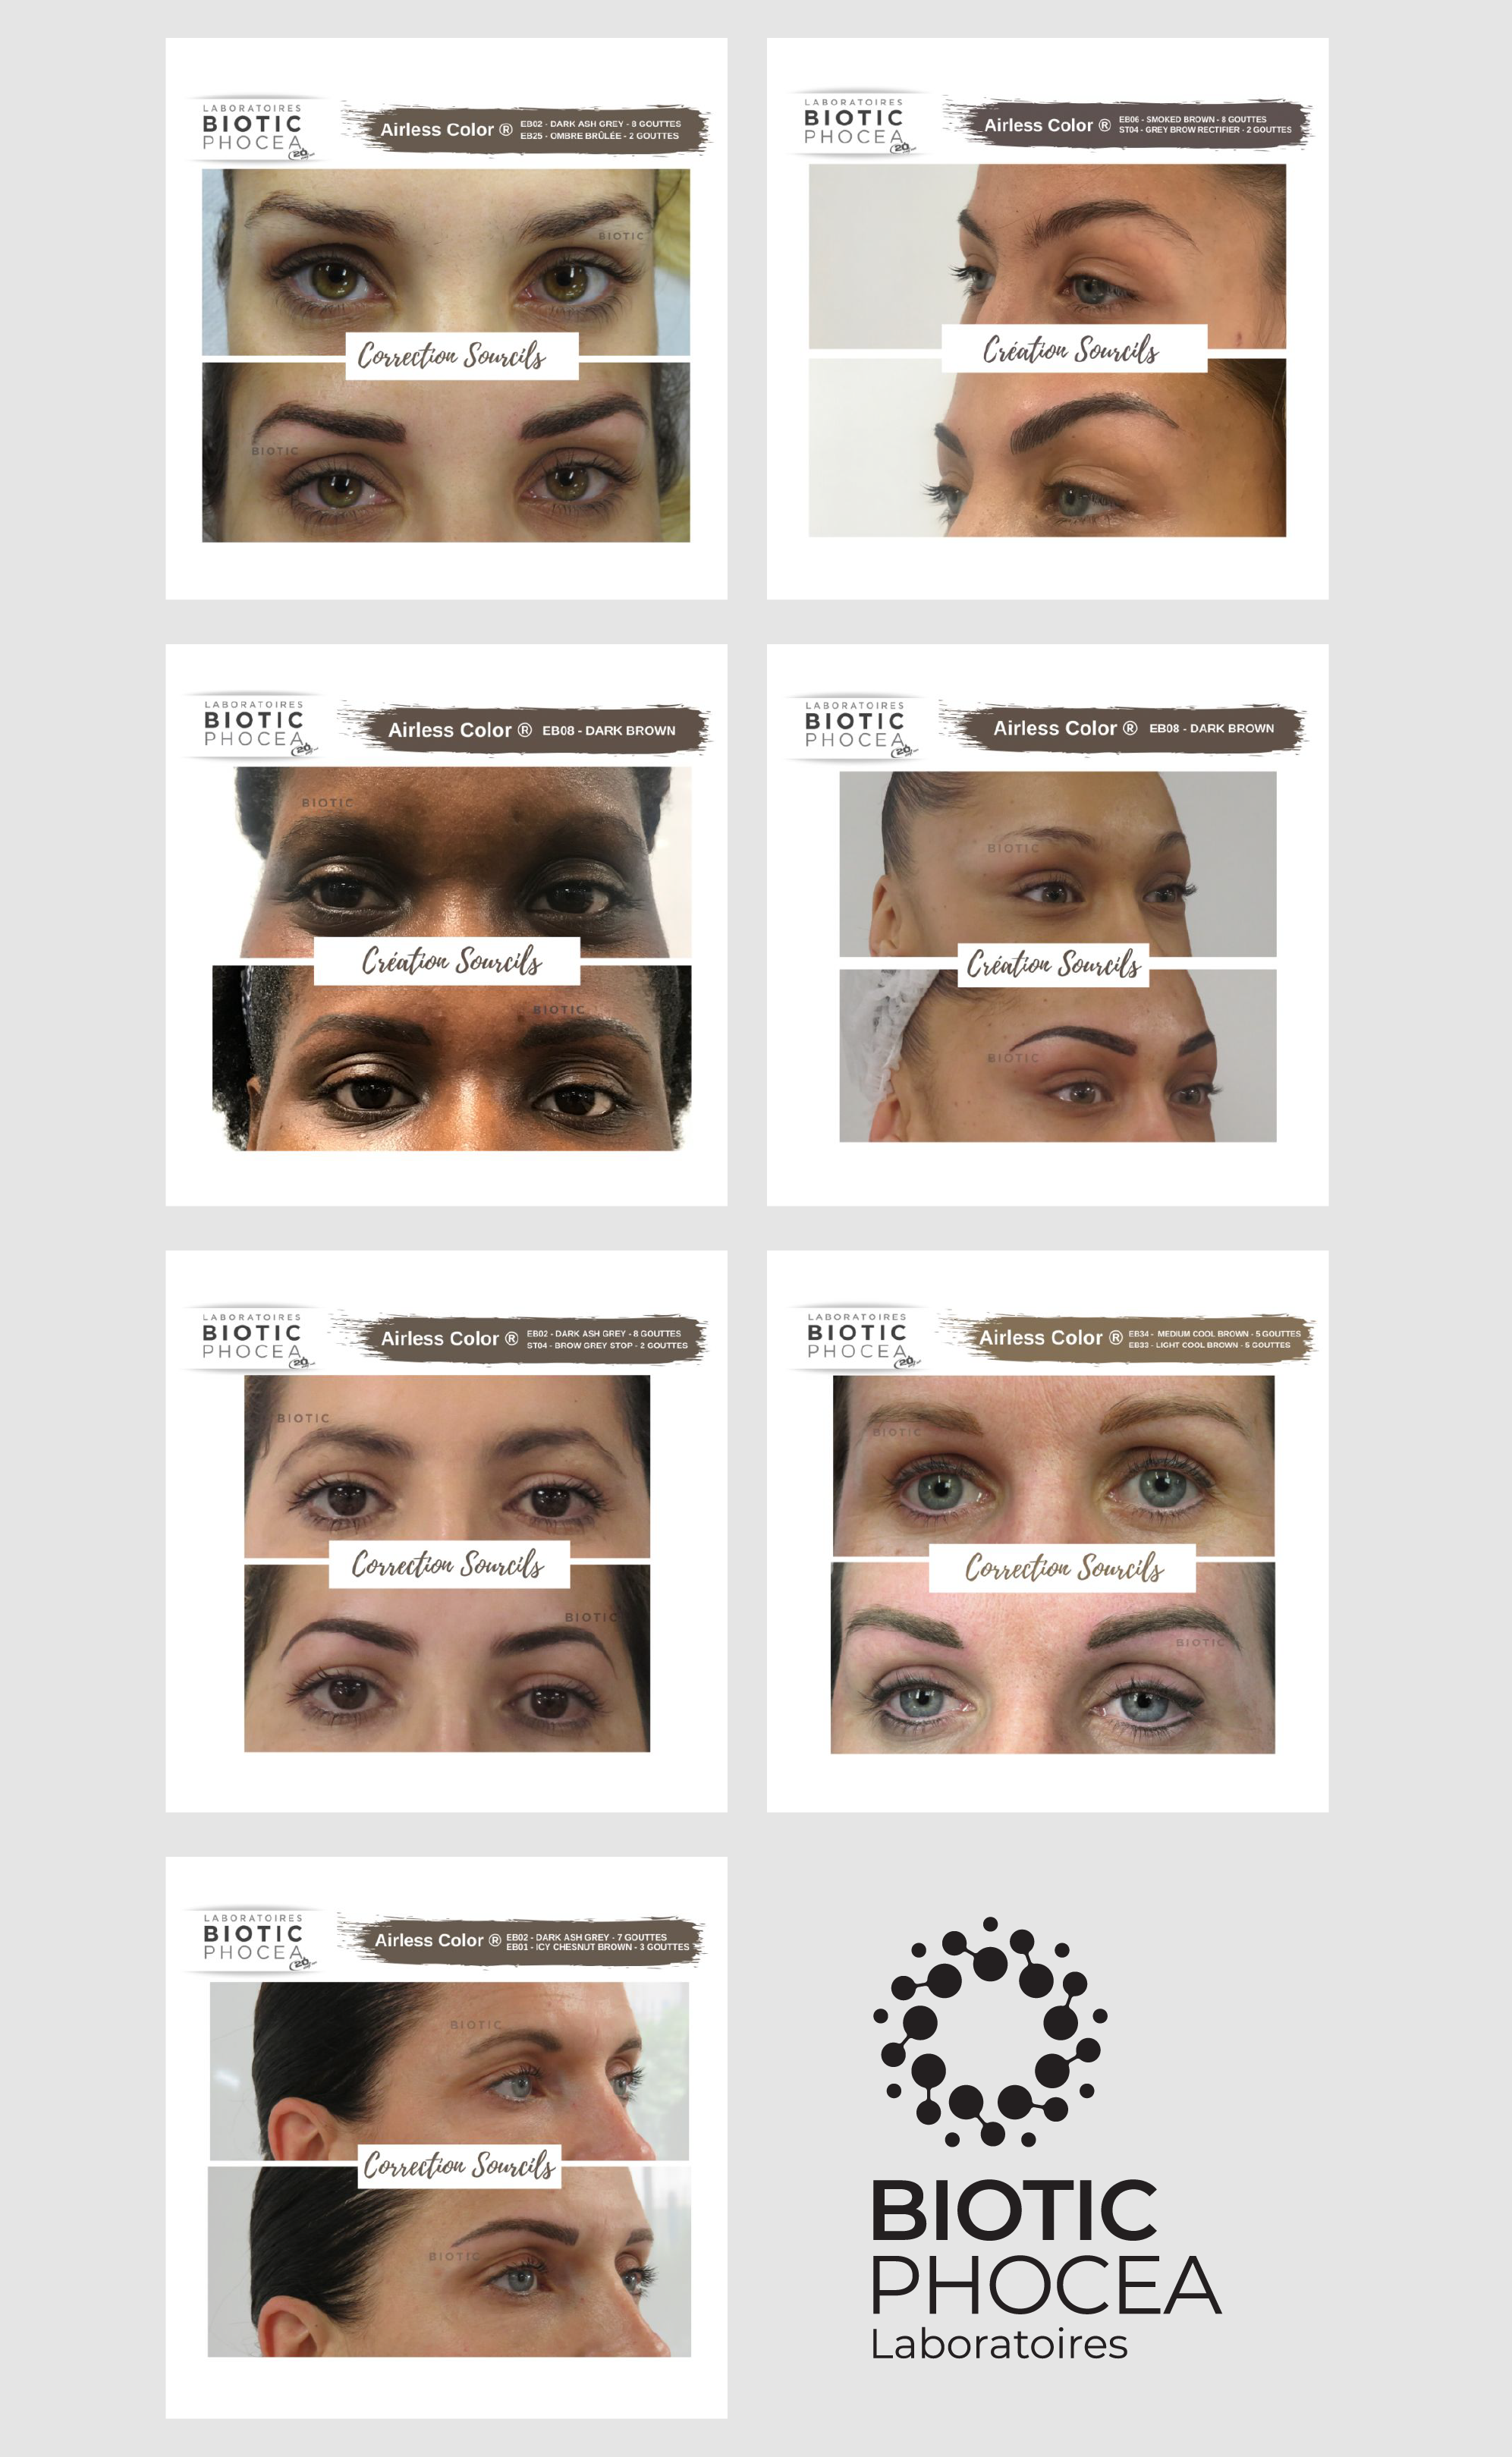 Biotic Phocea Airless Eyebrow Pigments before and after